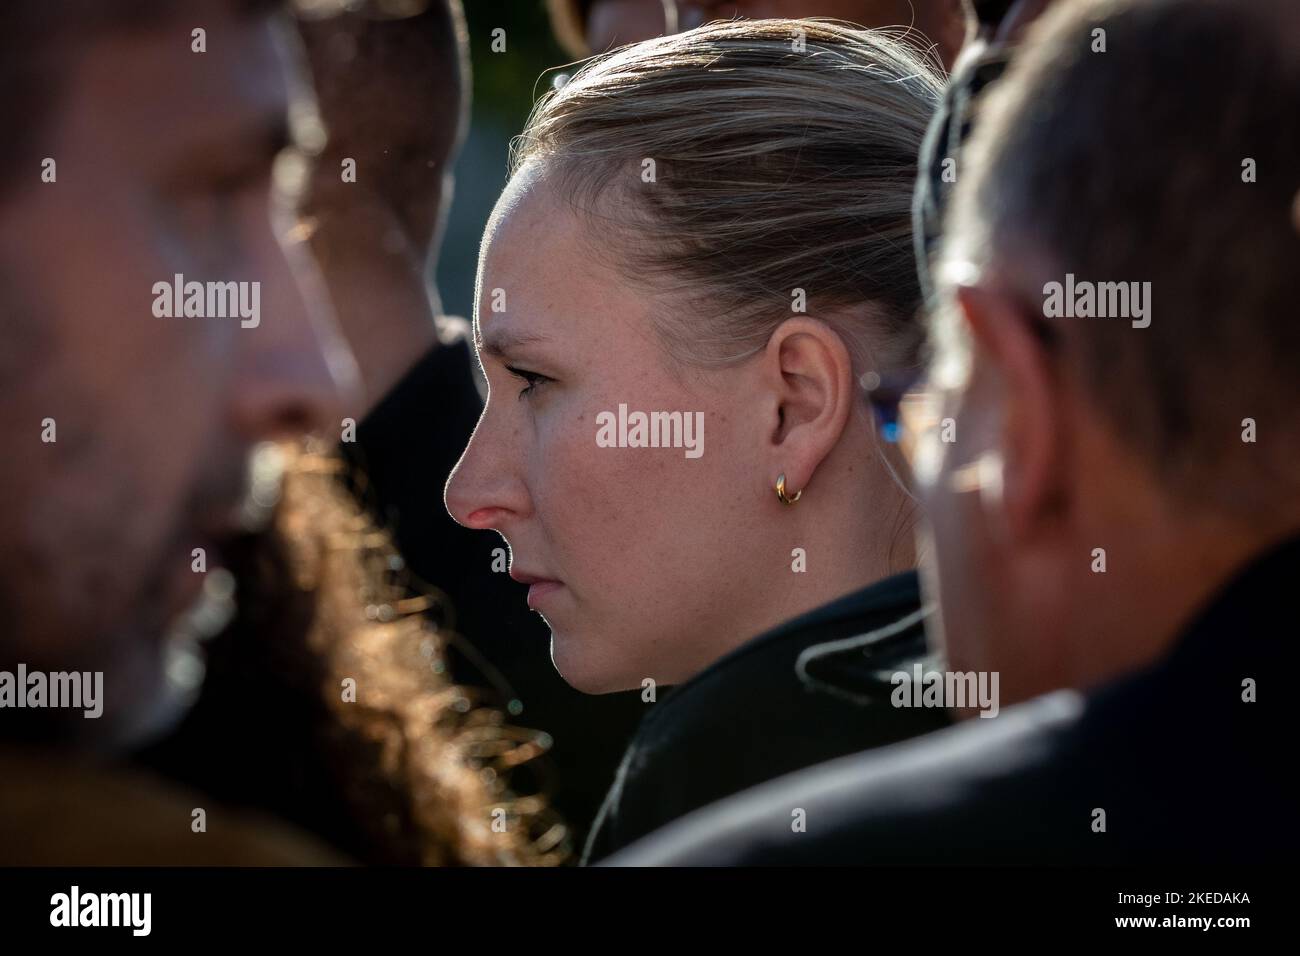 Toulon, France. 11th Nov 2022. Toulon, France. 11th Nov, 2022. Marion Marechal Le Pen seen during a press conference. The 'Reconquete!' party of the extreme right-wing polemicist, Eric Zemmour organized a protest action against the reception of refugees by France. The Ocean Viking arrived in Toulon with 230 migrants on board on 11 November 2022. This is the first time that a SOS Mediterranée ship has landed migrants in France. Credit: SOPA Images Limited/Alamy Live News Stock Photo